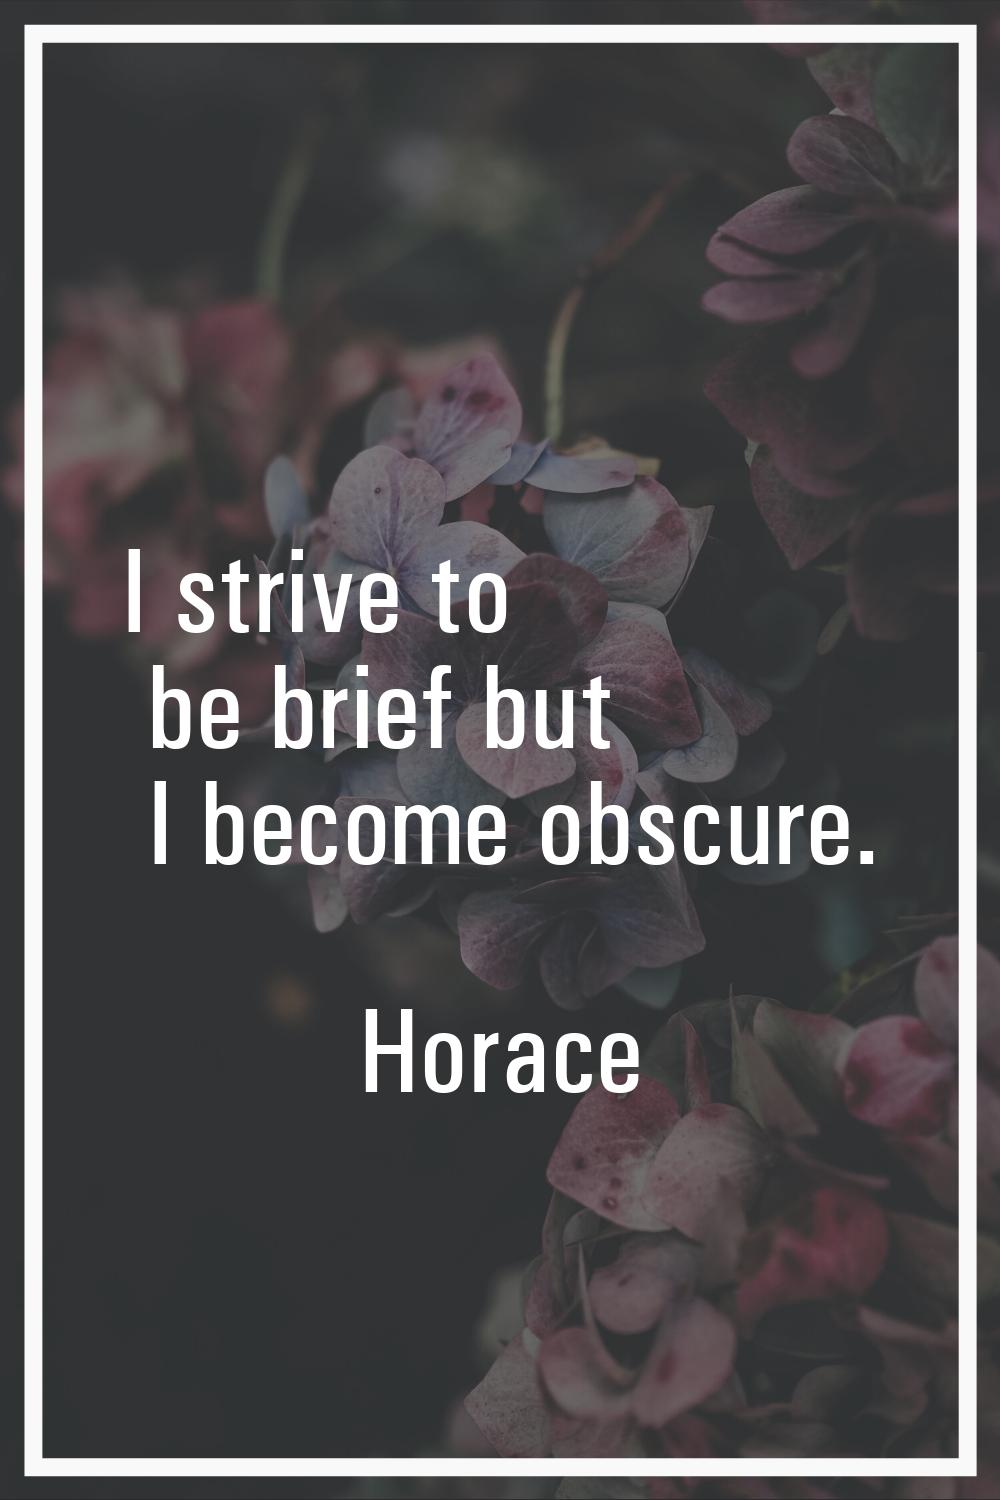 I strive to be brief but I become obscure.